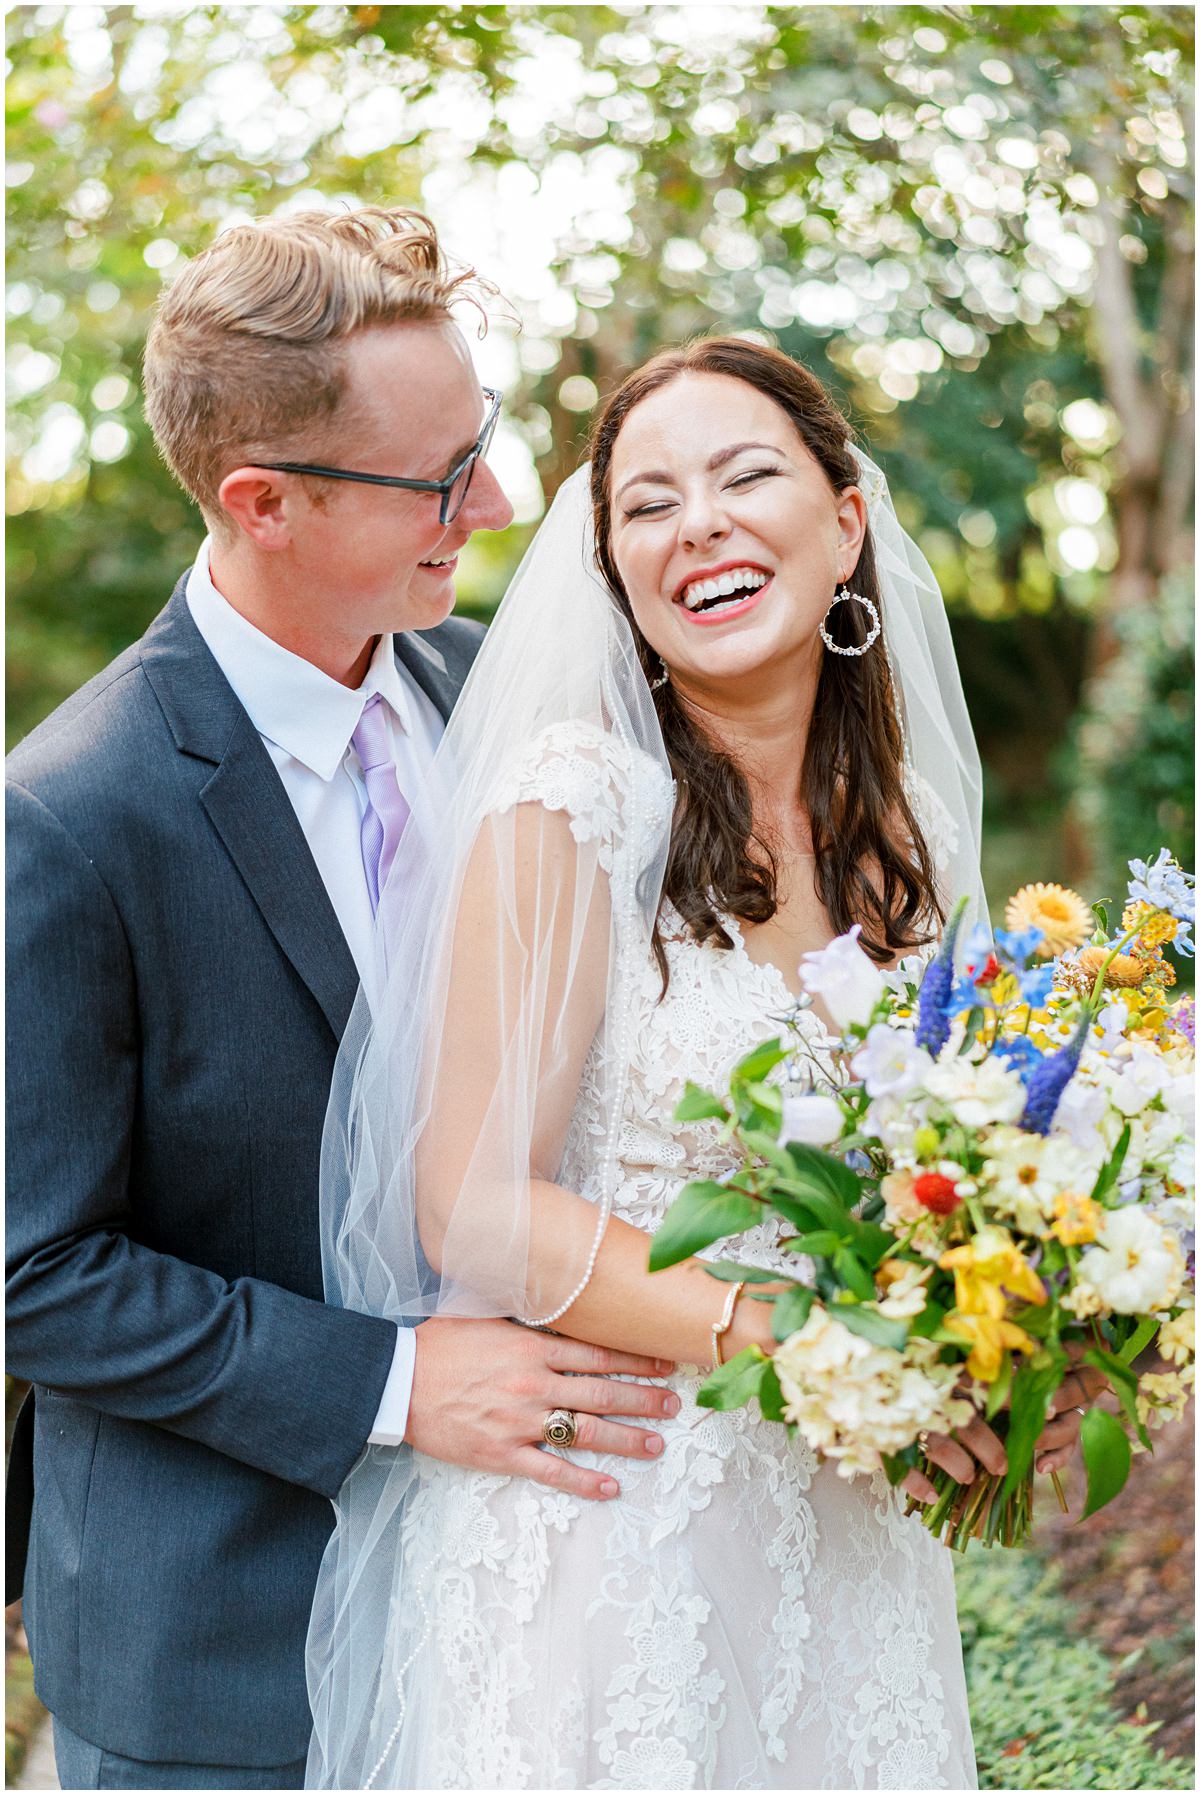 Spring Wedding Bouquet Inspiration with Pops of Color